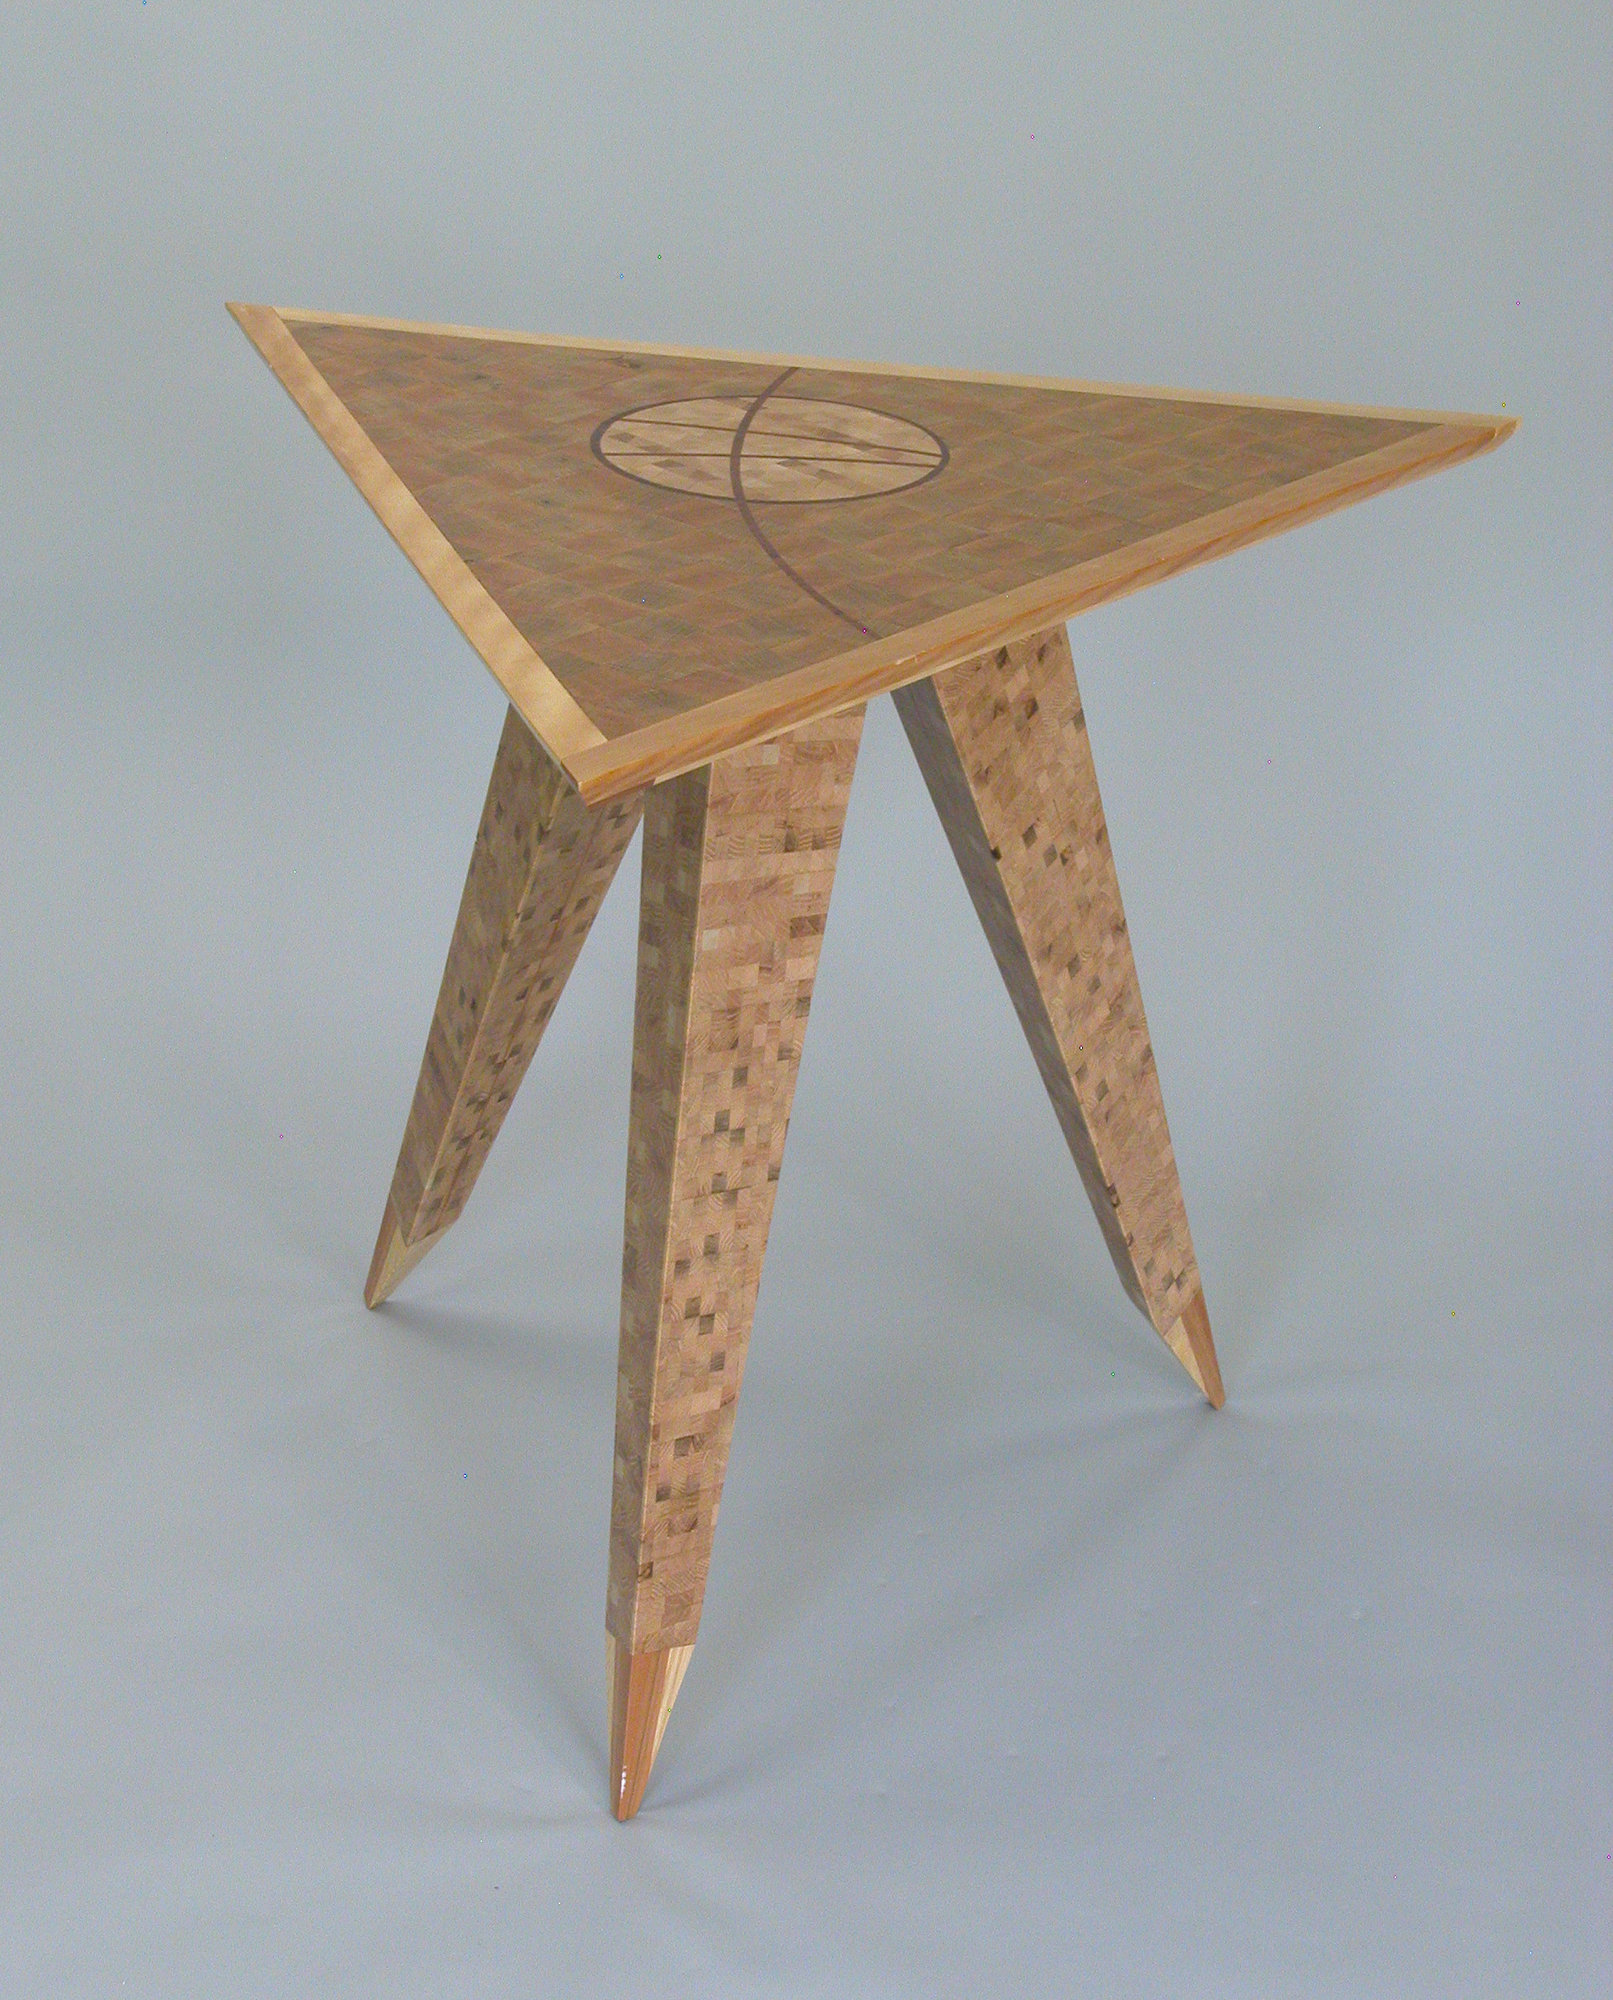 Triangle Table 1 By Charles Adams Wood Side Table Artful Home